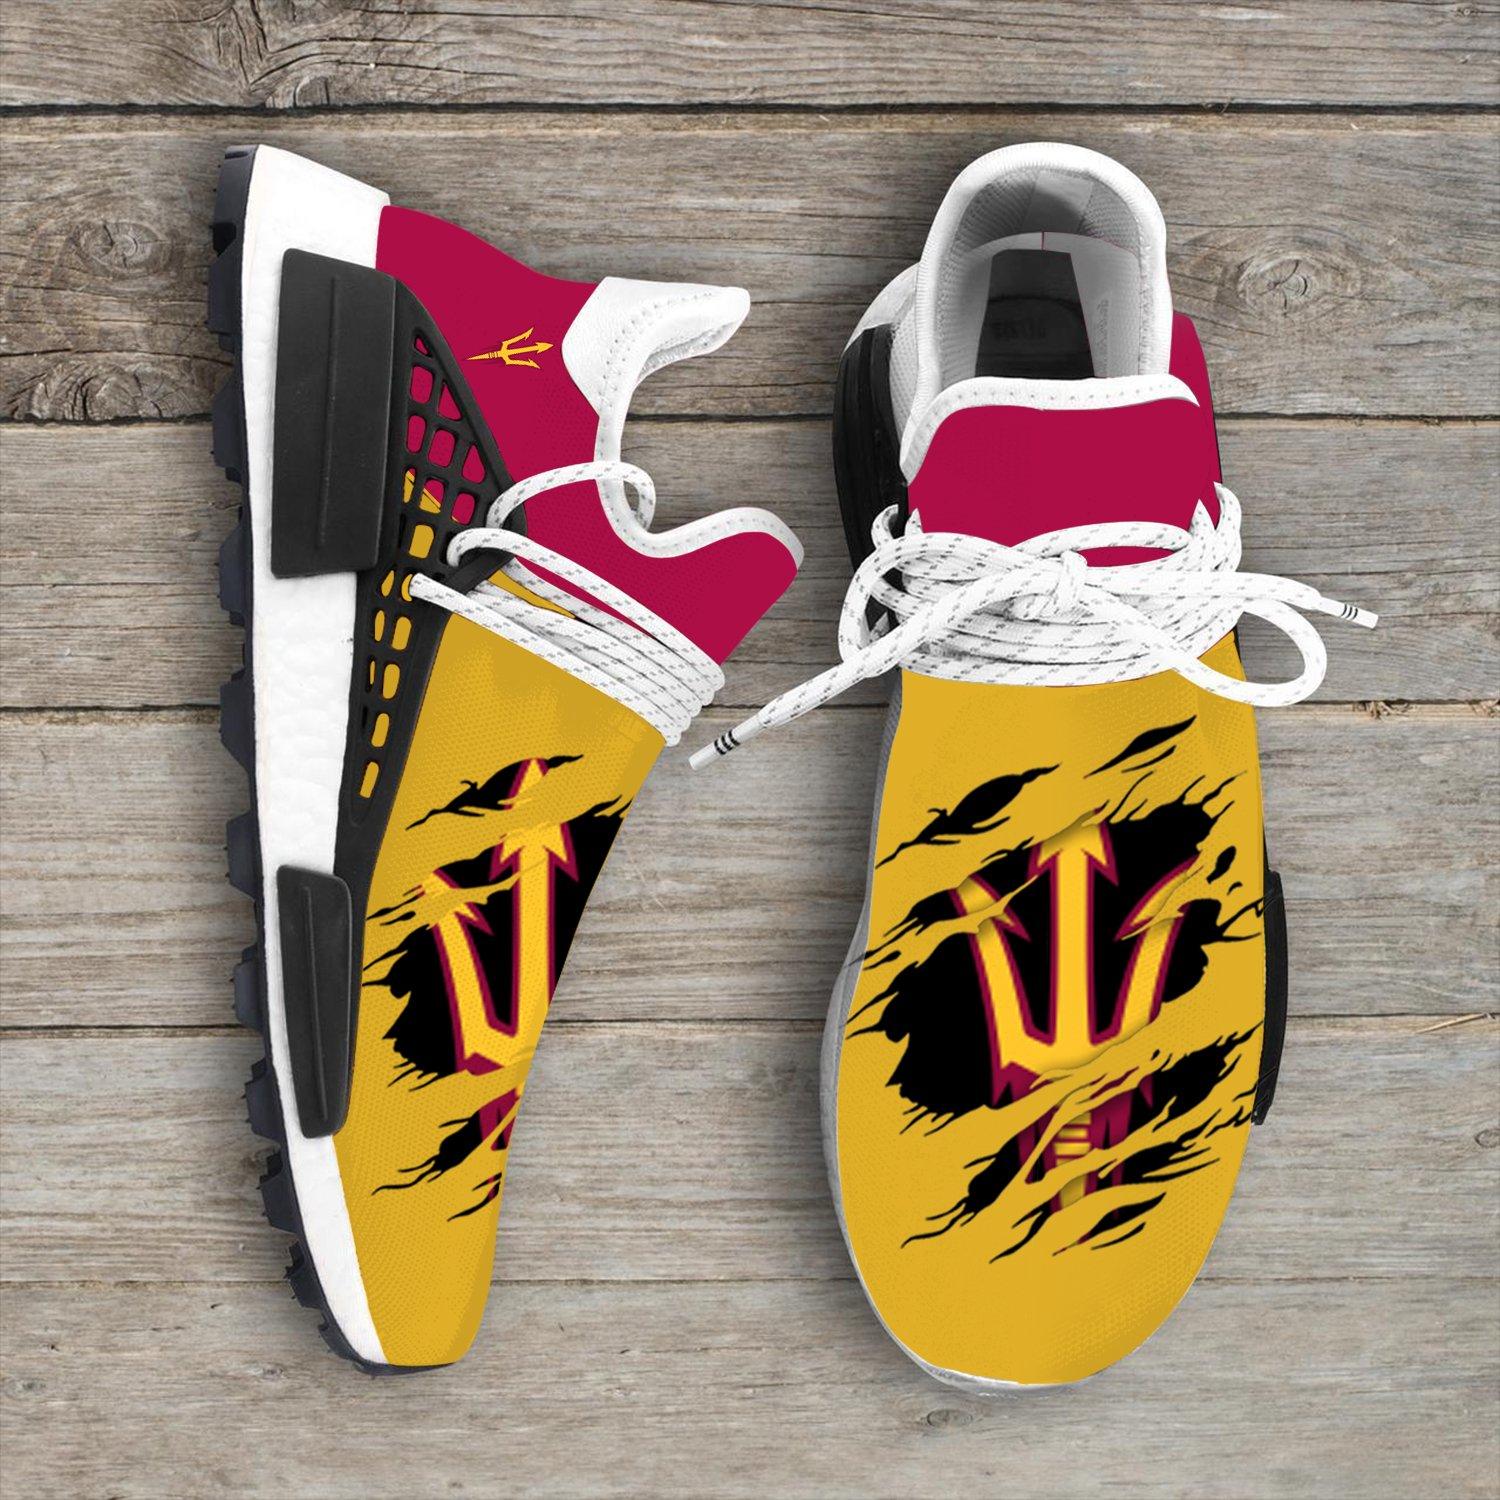 Arizona State Sun Devils Custom NMD Sneakers Top Branding Trends 2020 All Sizes US5-14 – dyotees.com Shirts | Shop Funny T Shirts | Your Own Custom T Shirts